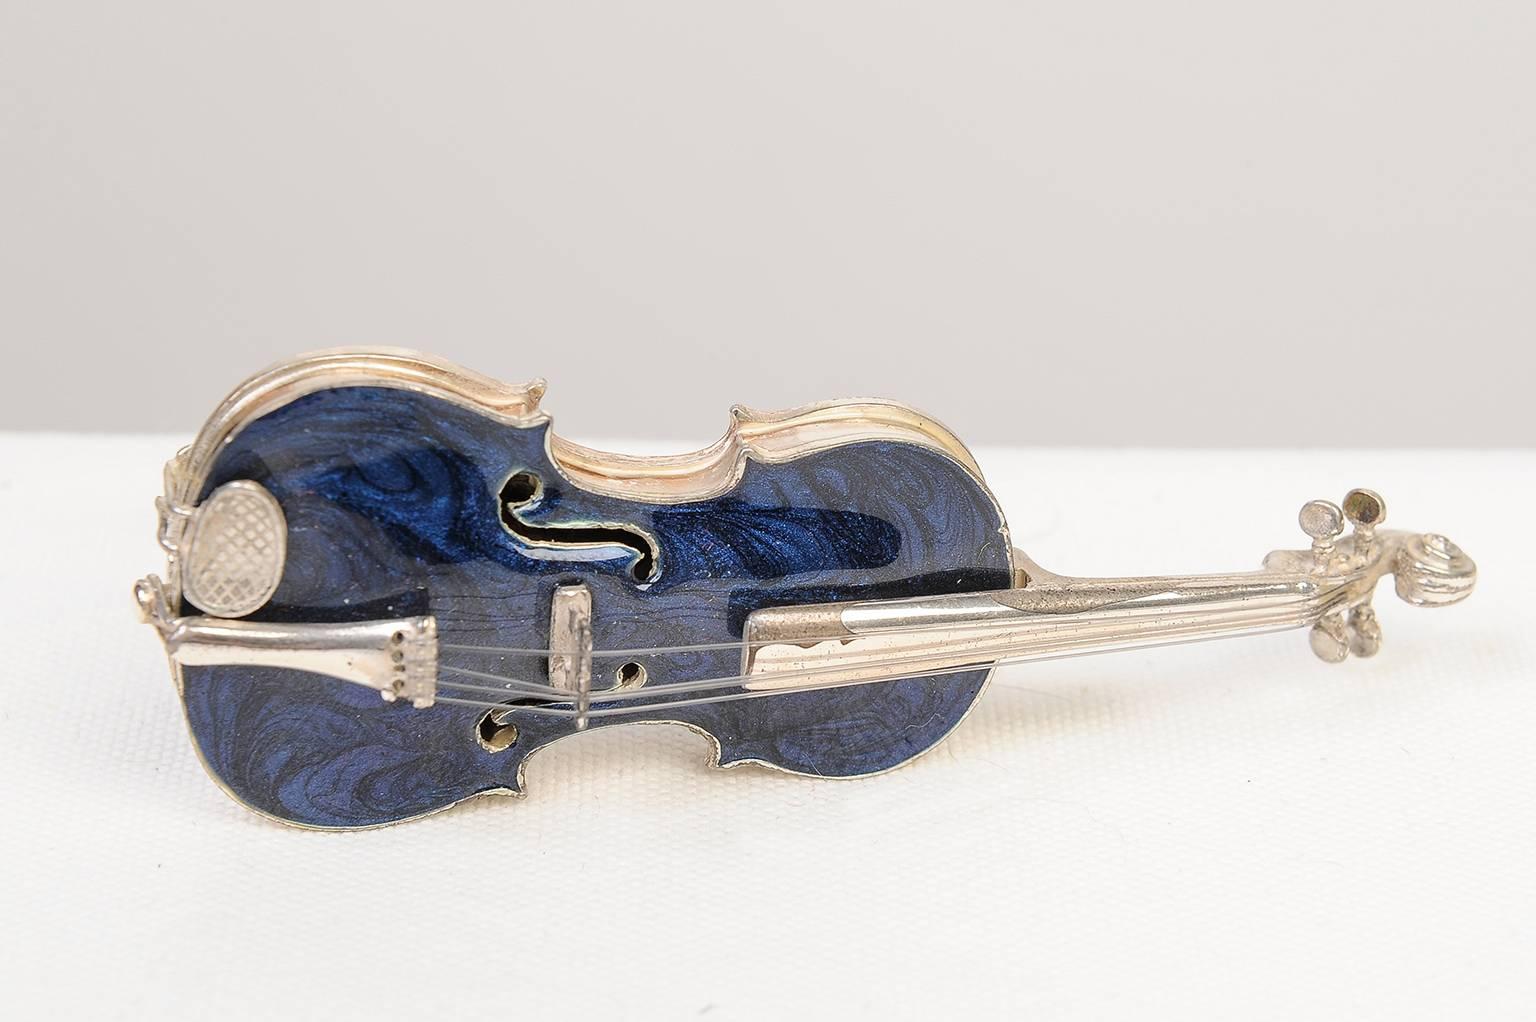 Beautiful signed Tuscan miniature violin, silver and blue enamel, in its little case.
A/2849 -